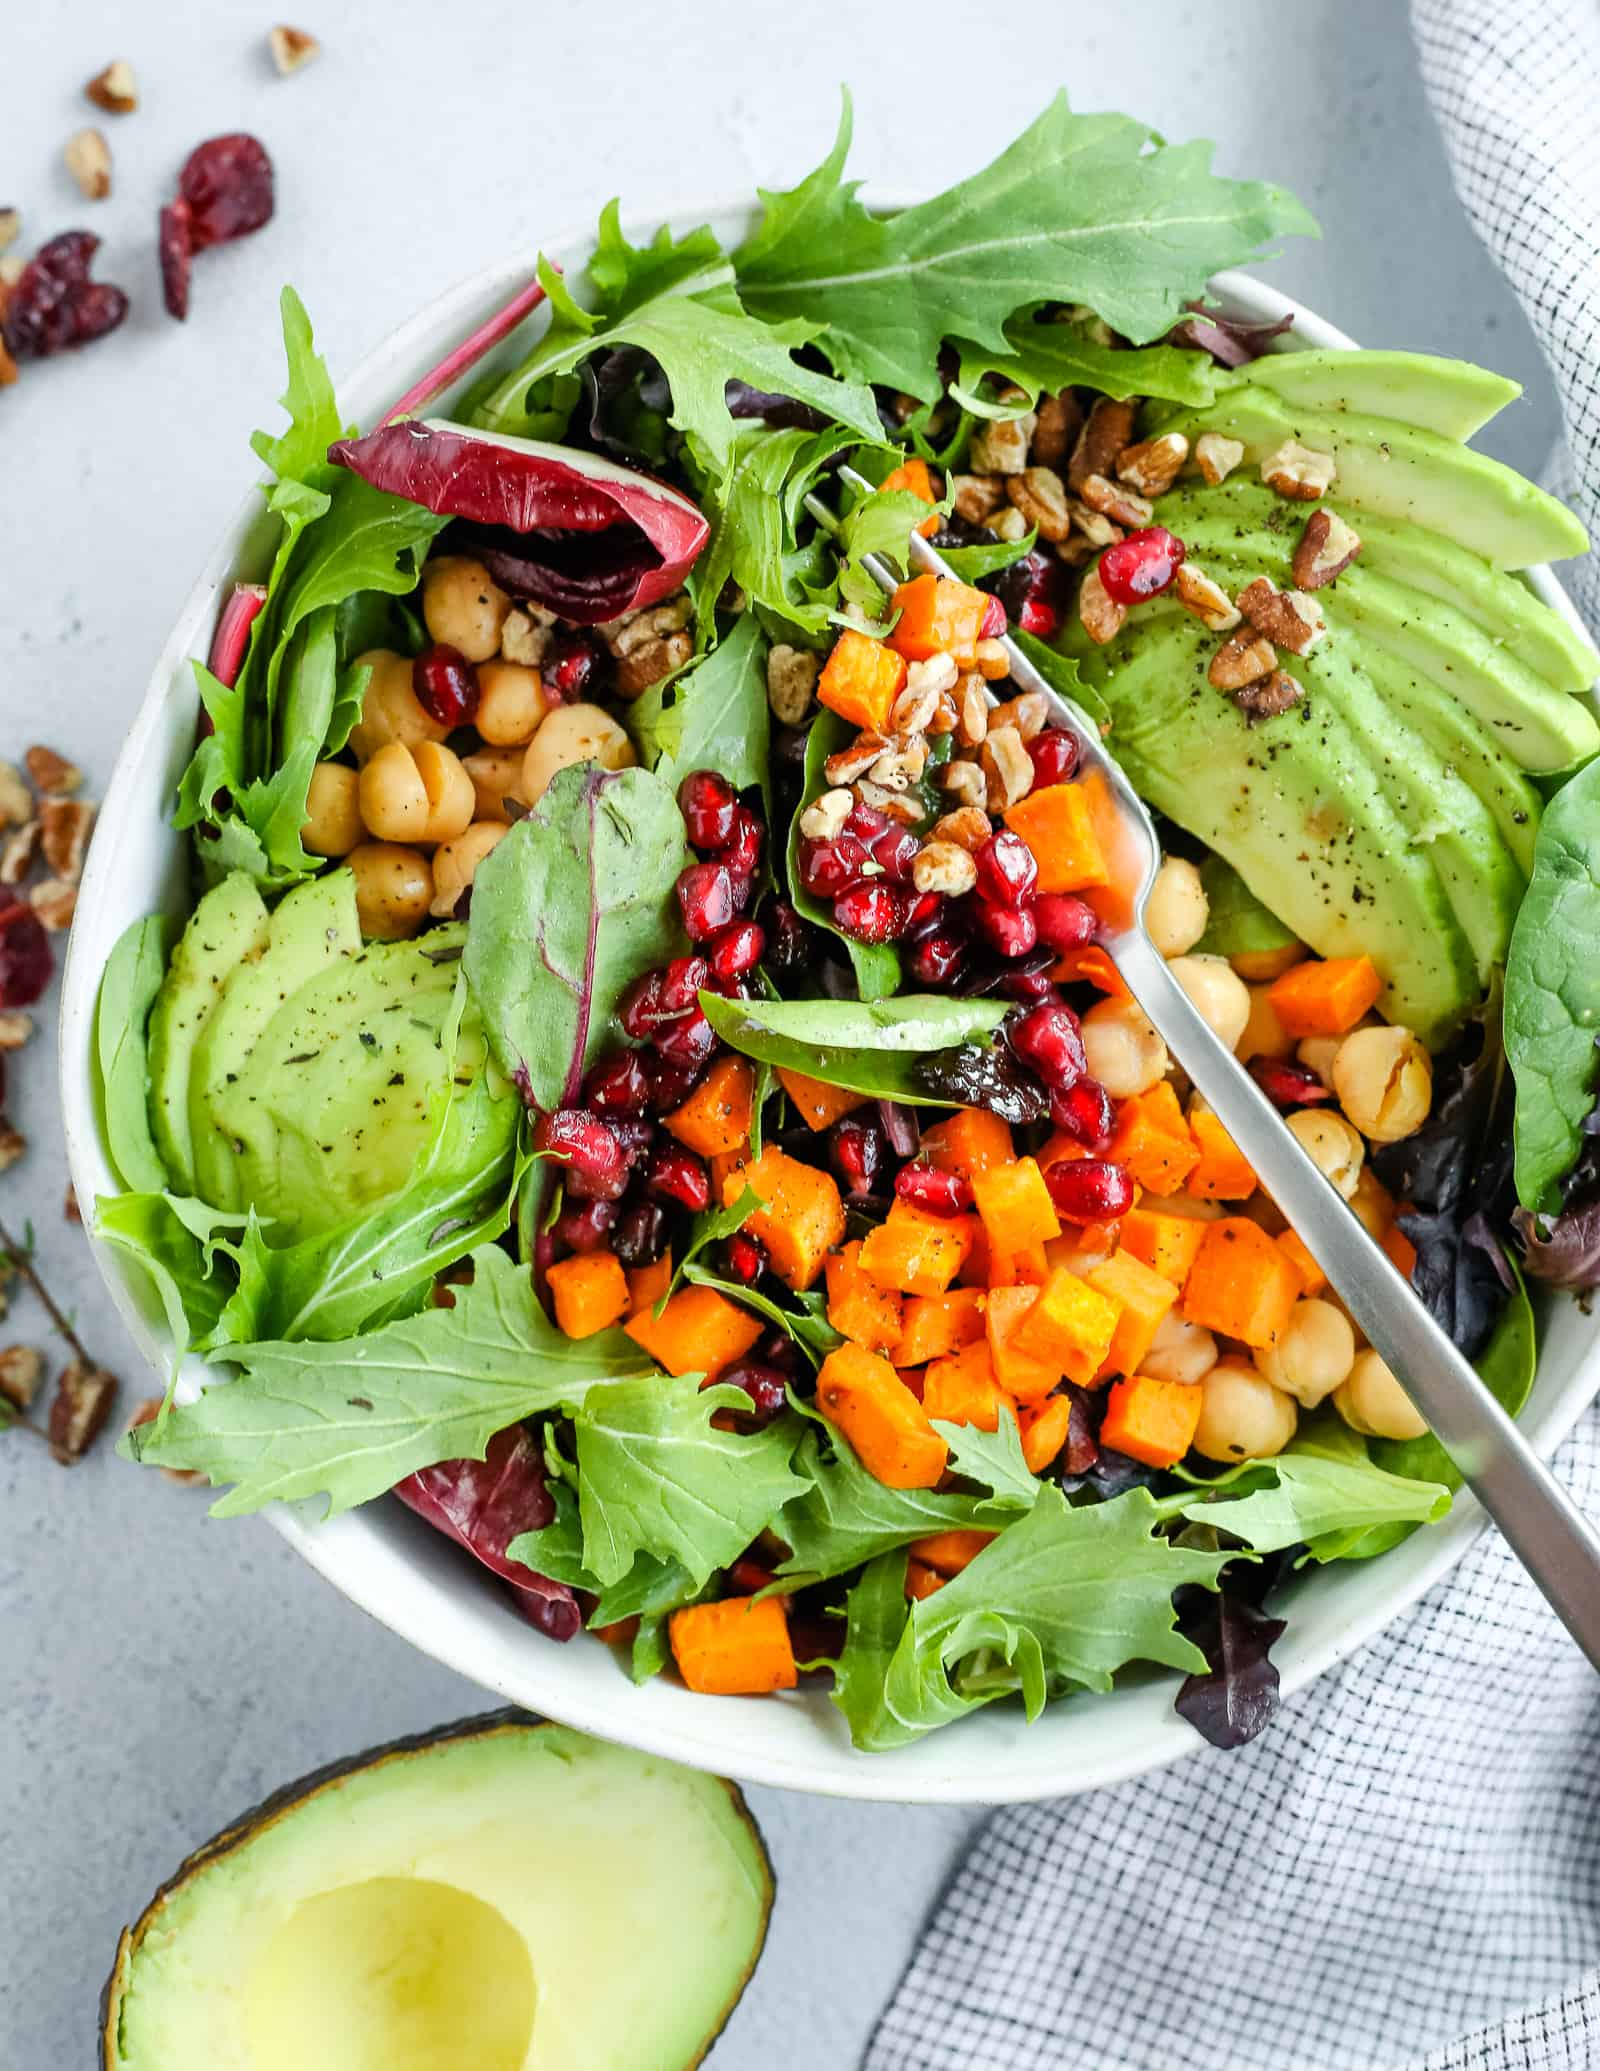 Colorful salad with pomegranate seeds and avocado